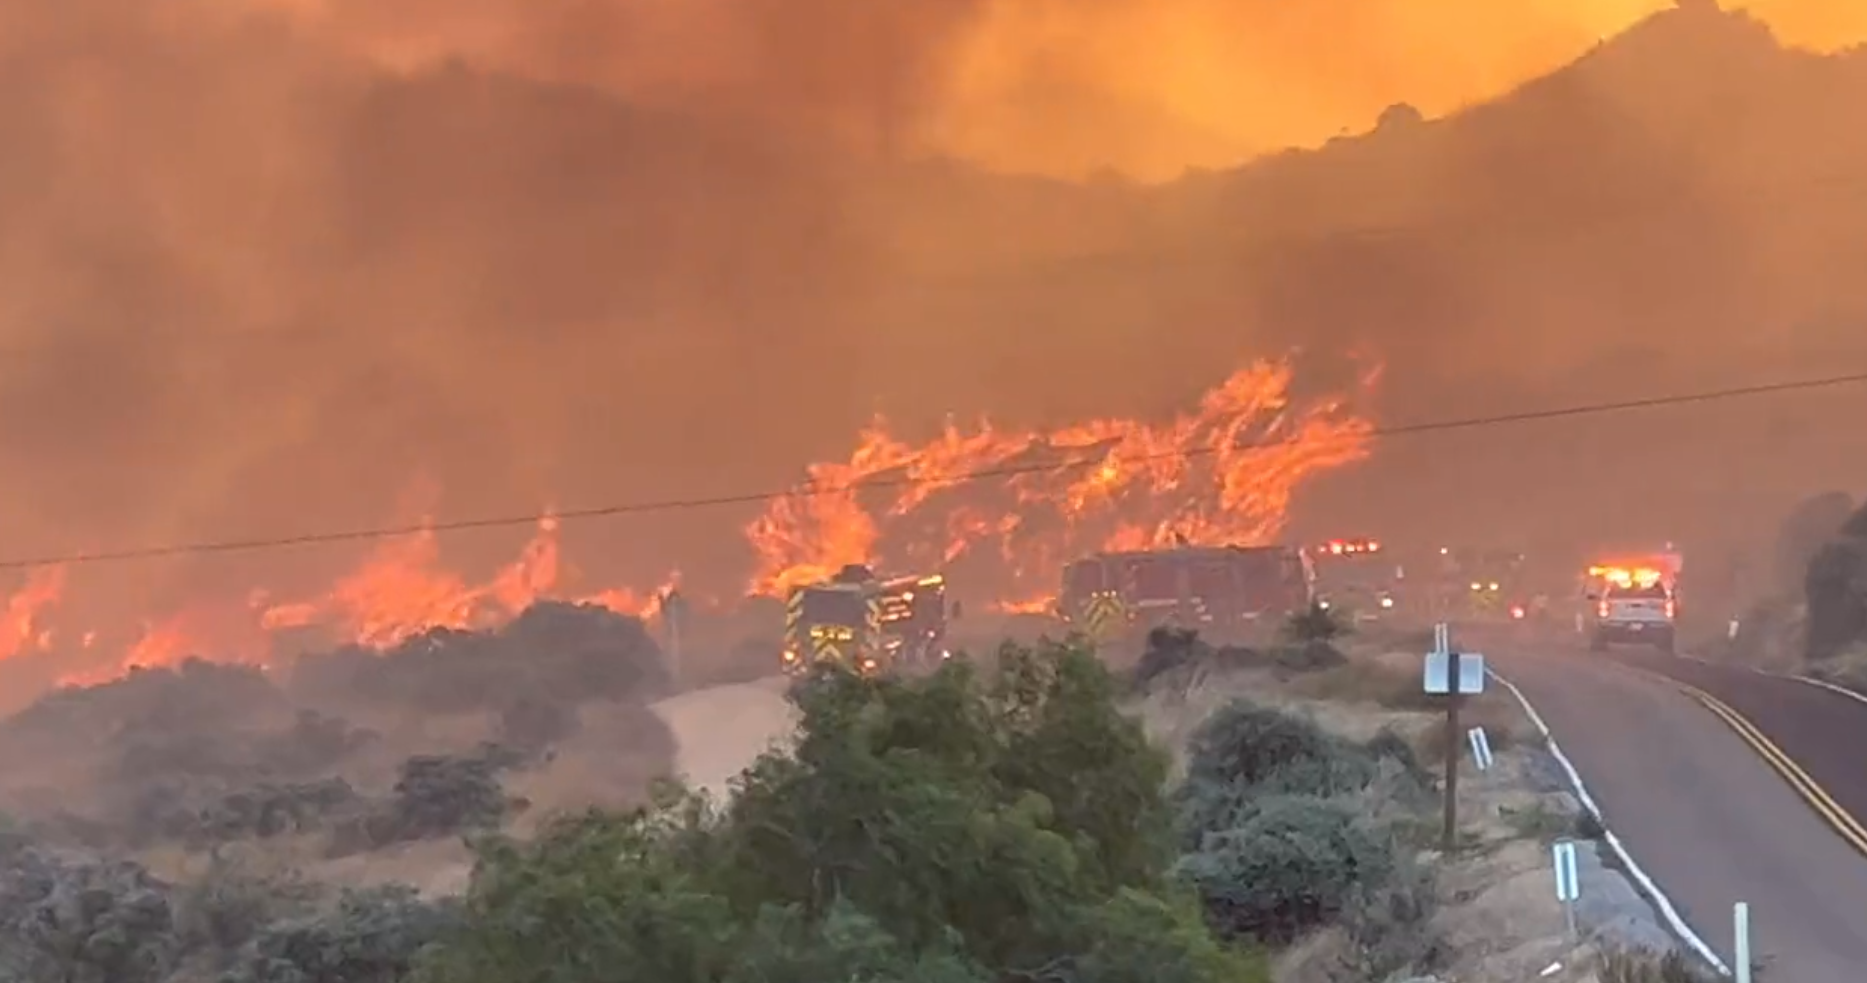 Thousands evacuated due to a fire in California